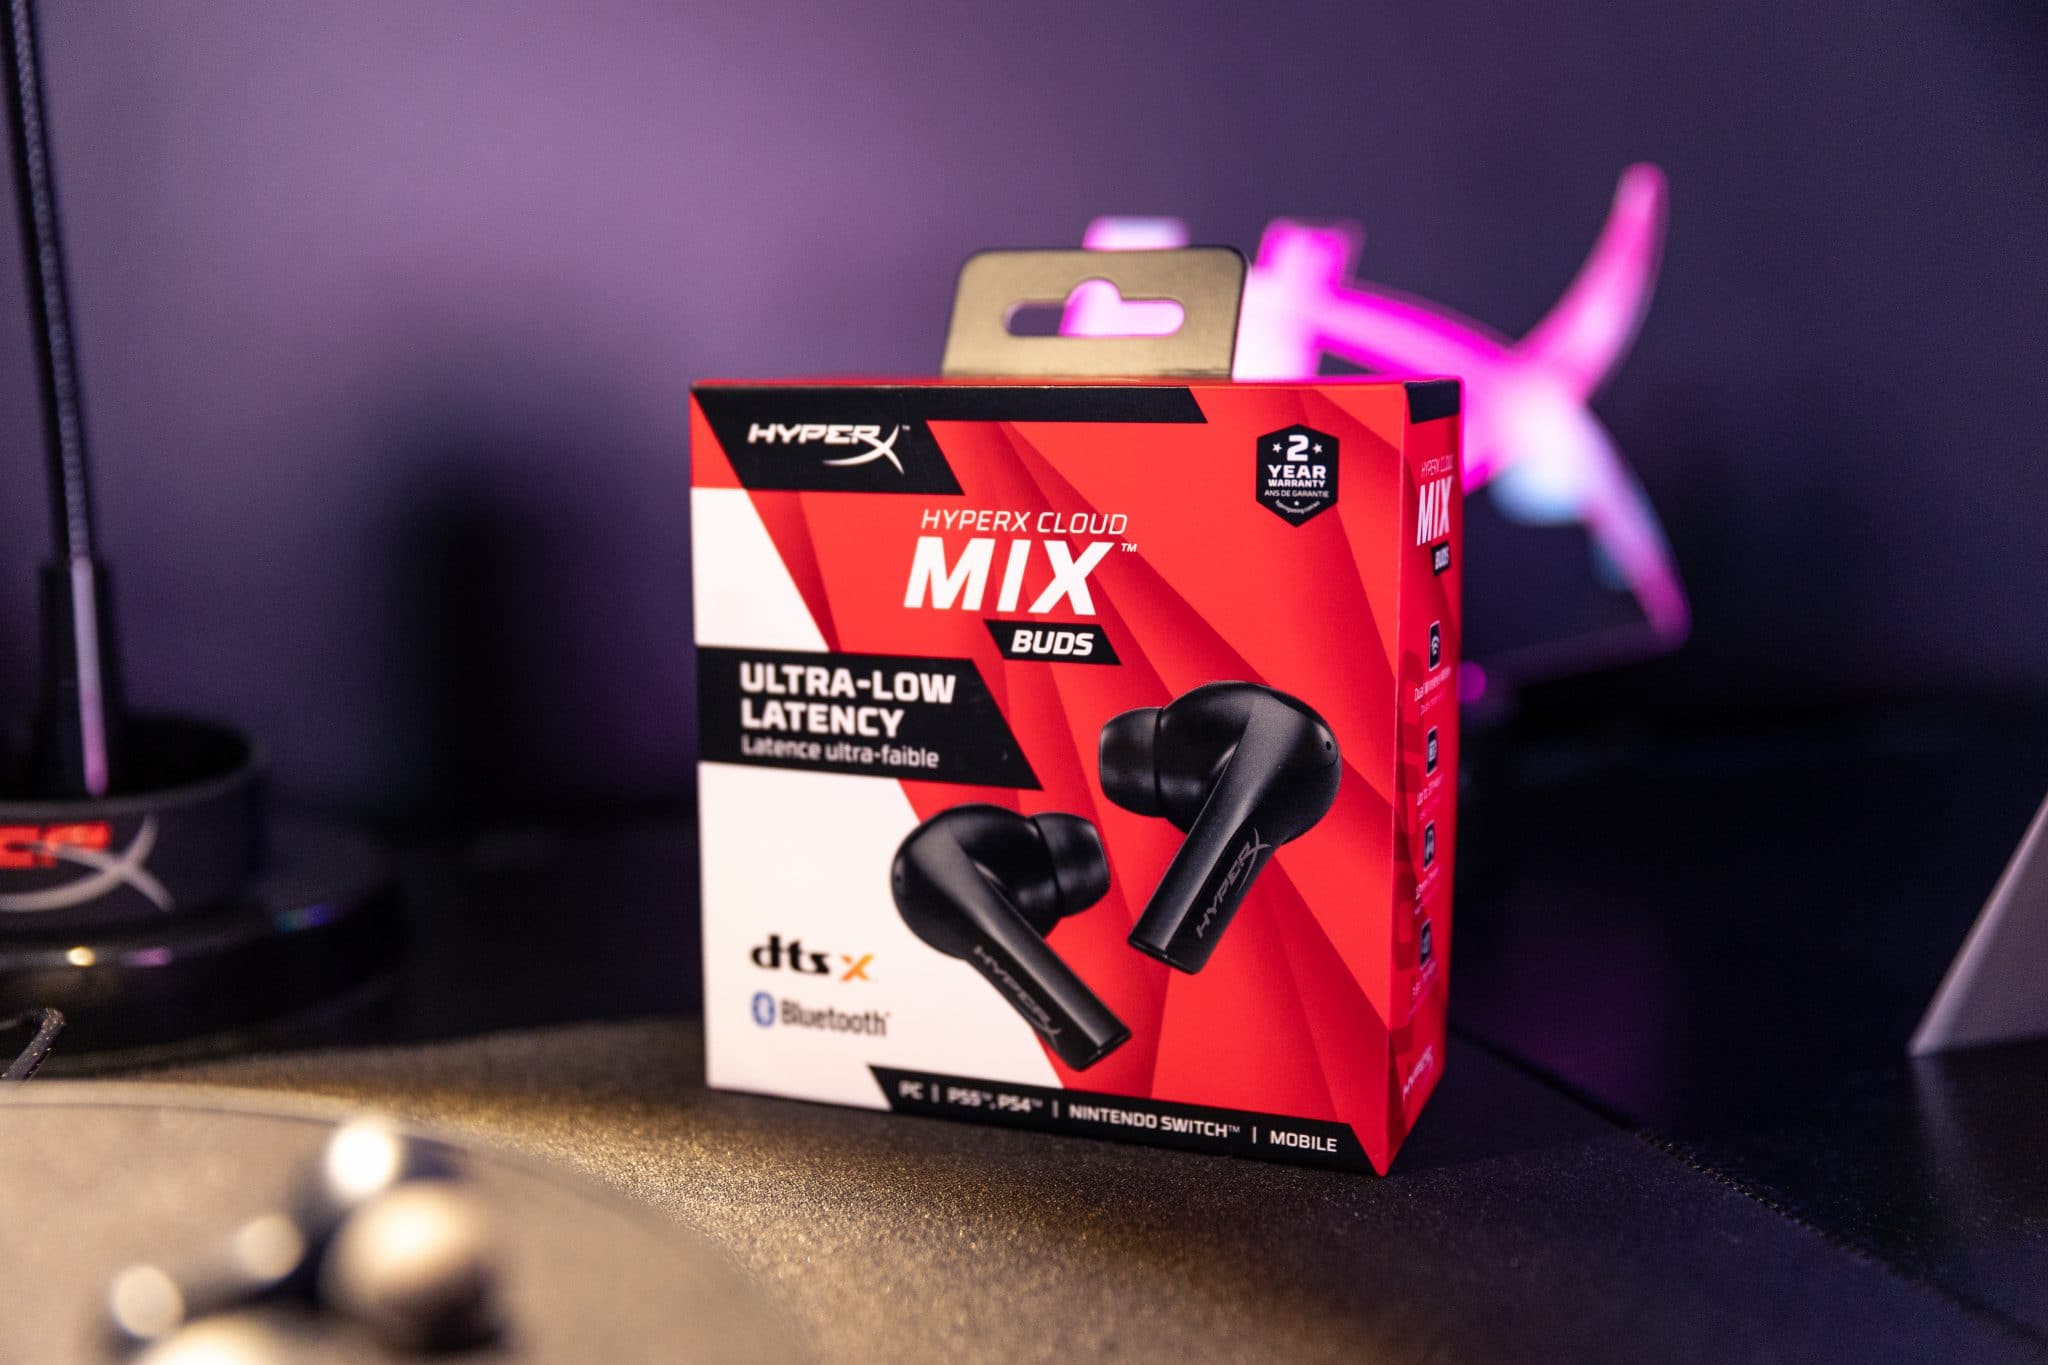 Buds HyperX Options Of Announcement World True - Wireless, Dual-Connection & - Noisy Pixel A Mix